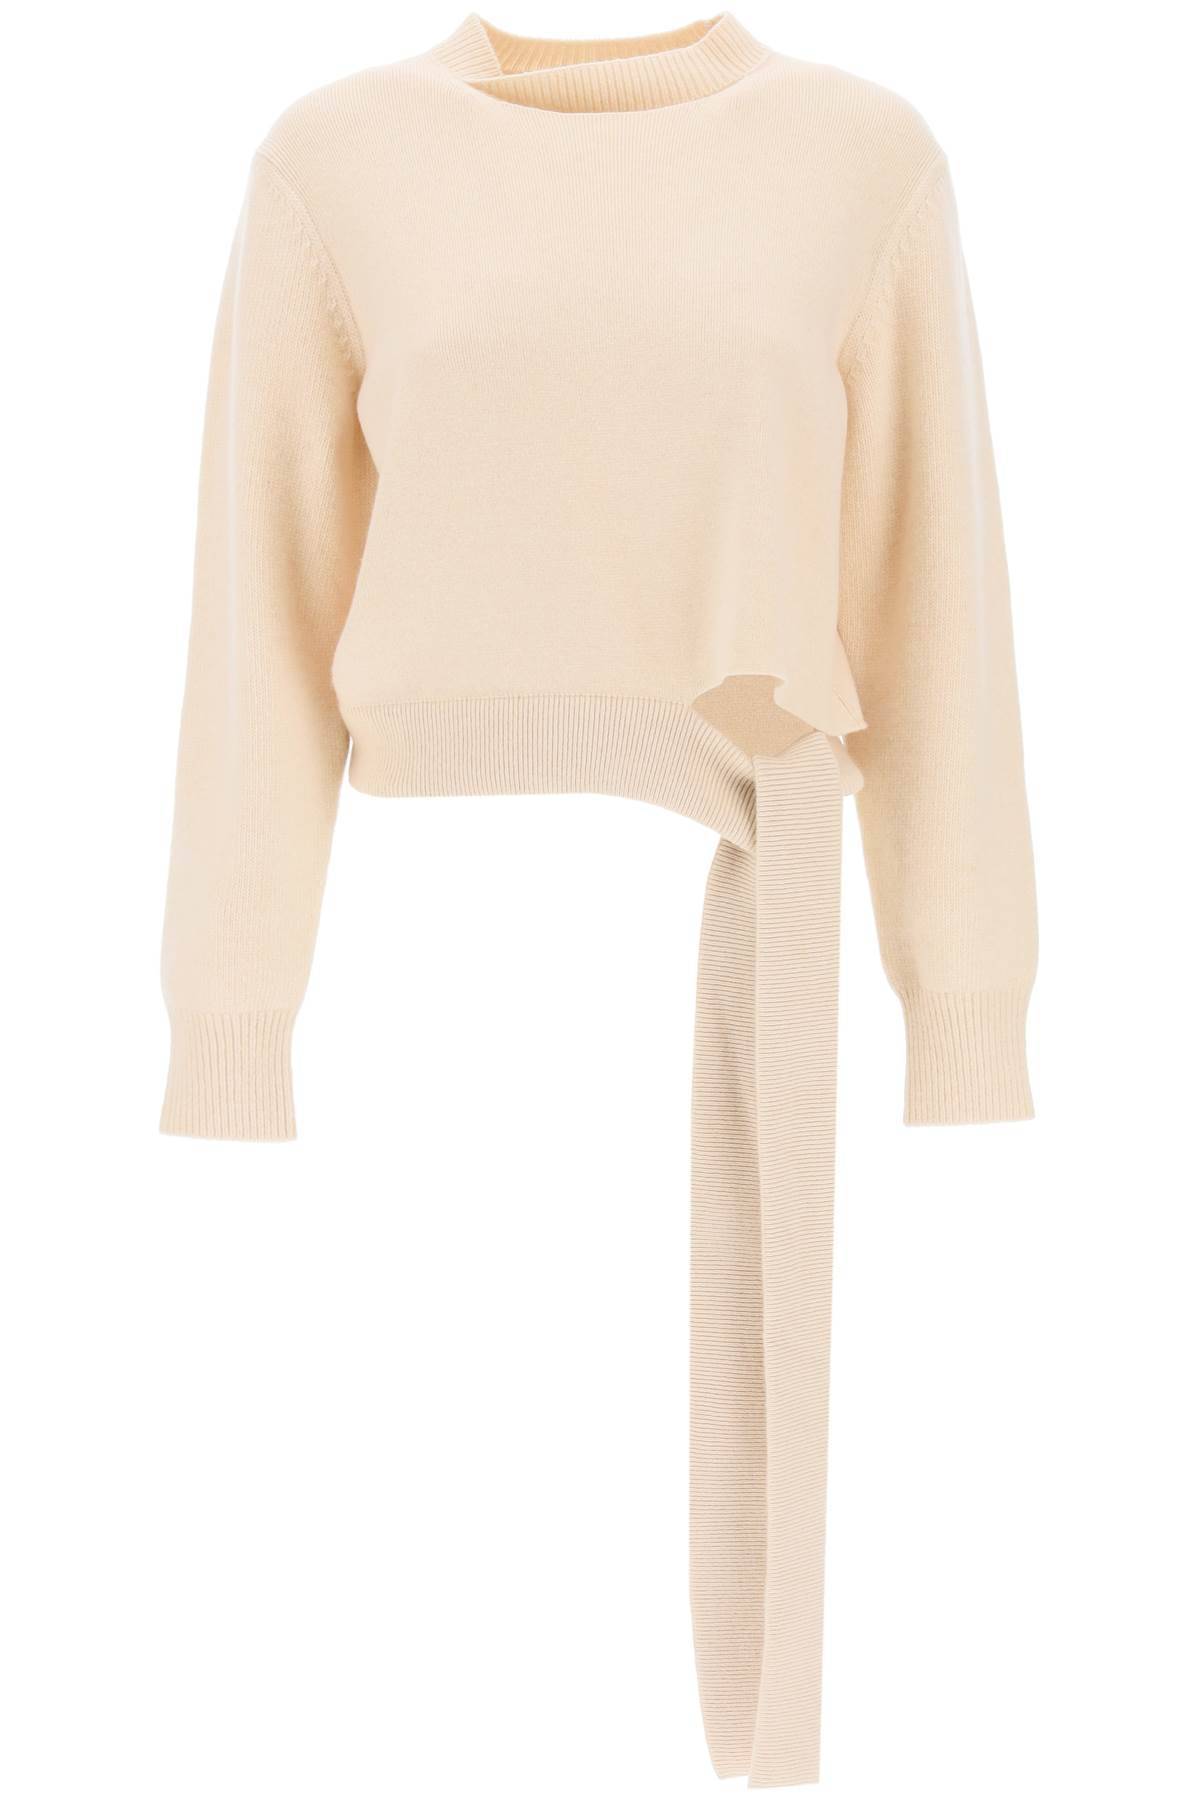 Fendi Wool And Cashmere Sweater With Sash In White